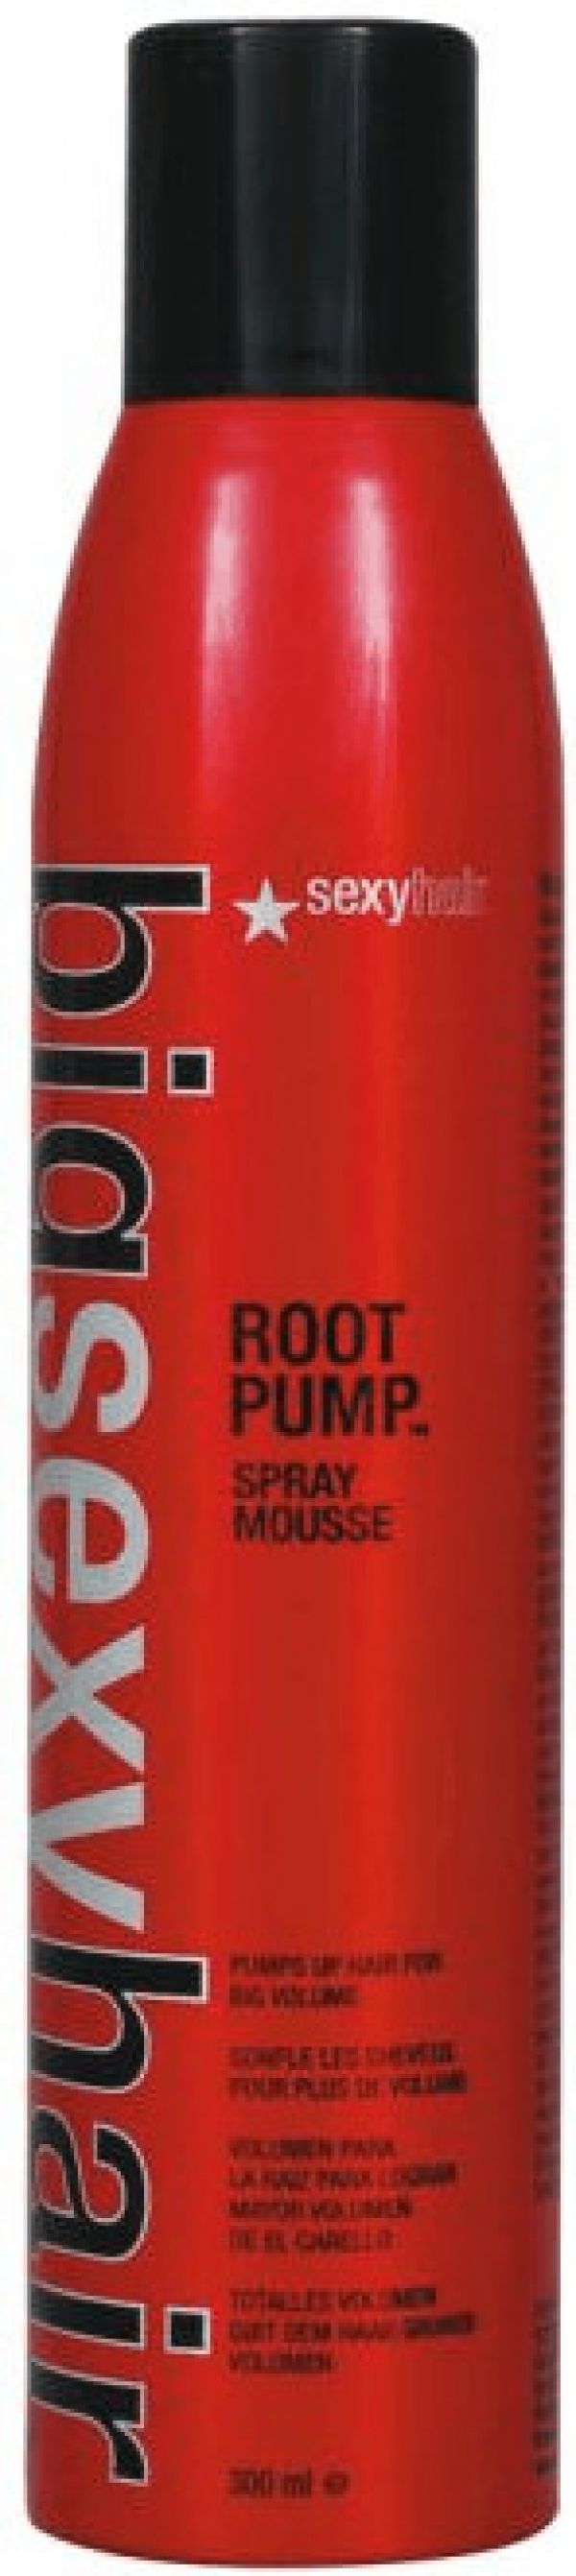 Big Root Pump Spray Mouse